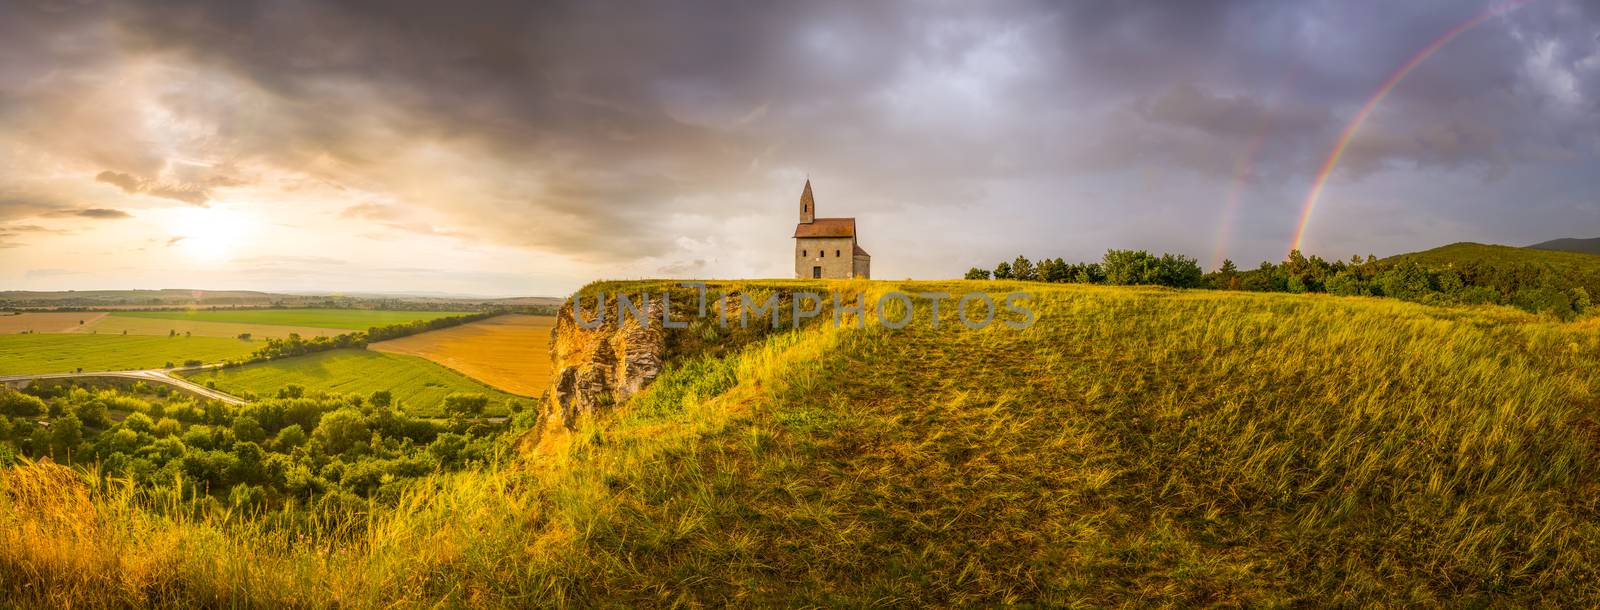 Old Roman Catholic Church of St. Michael the Archangel with Rainbow on the Hill at Sunset in Drazovce, Slovakia